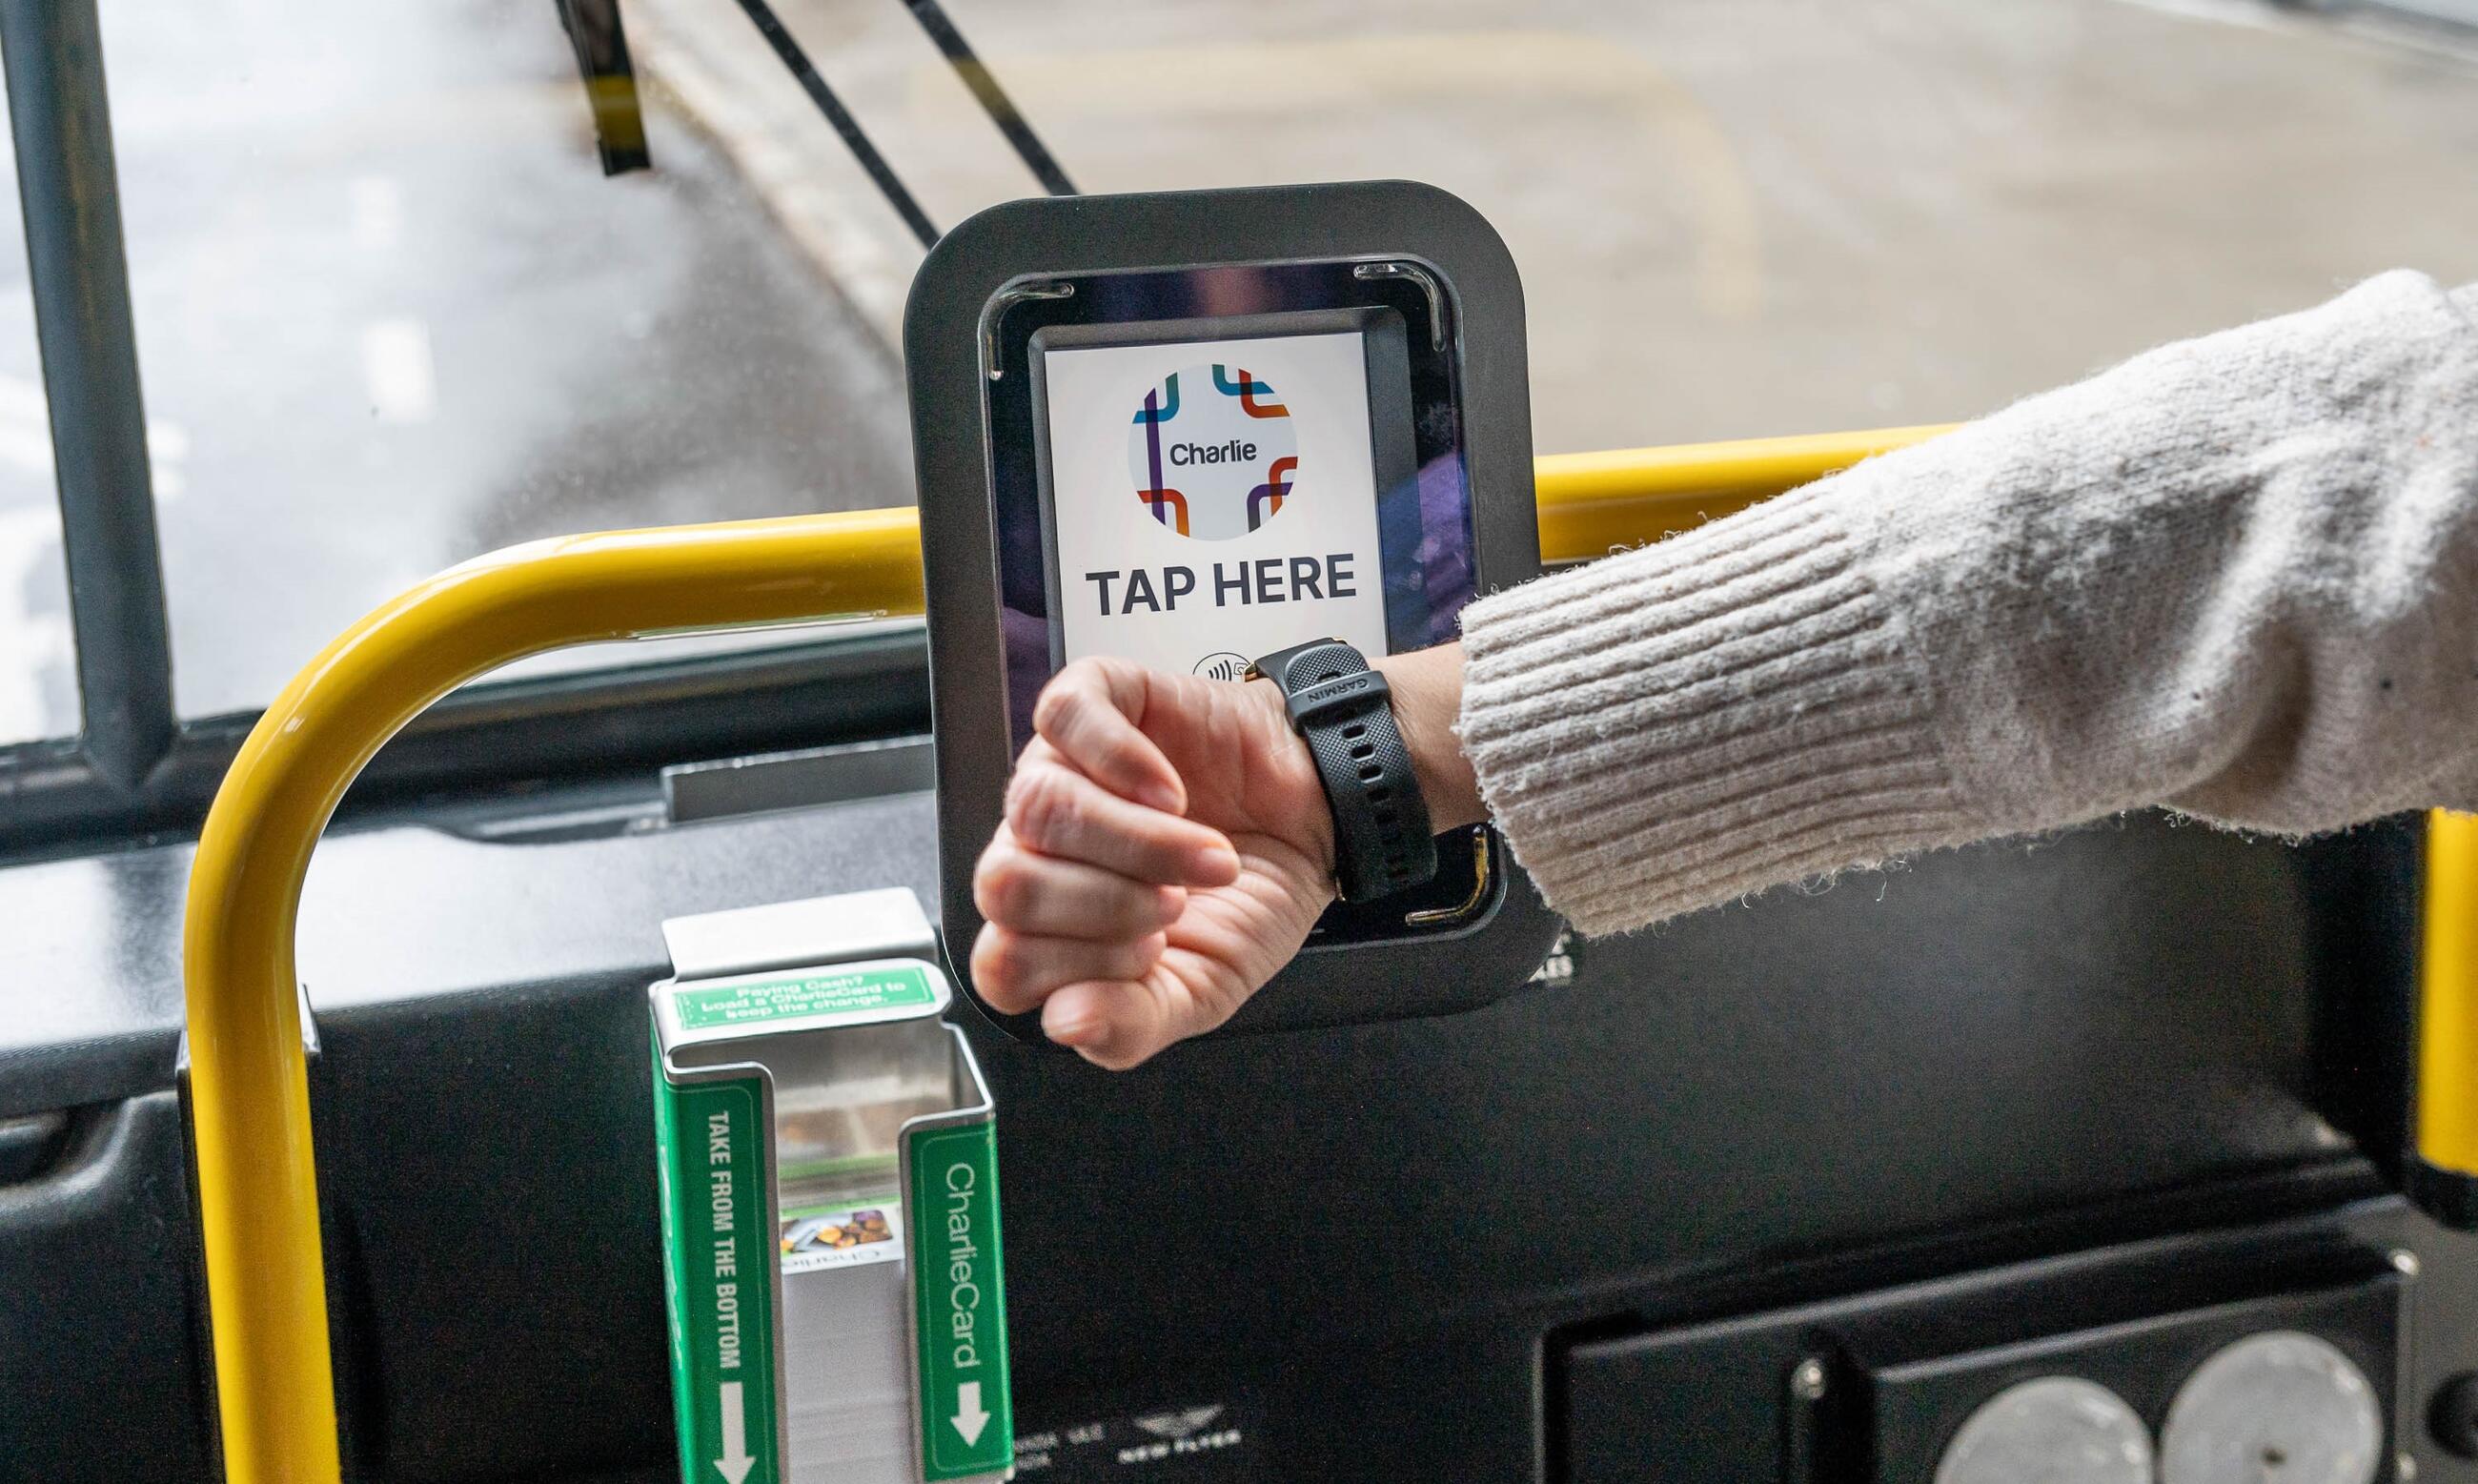  Rider tapping contactless watch on bus reader that reads tap here